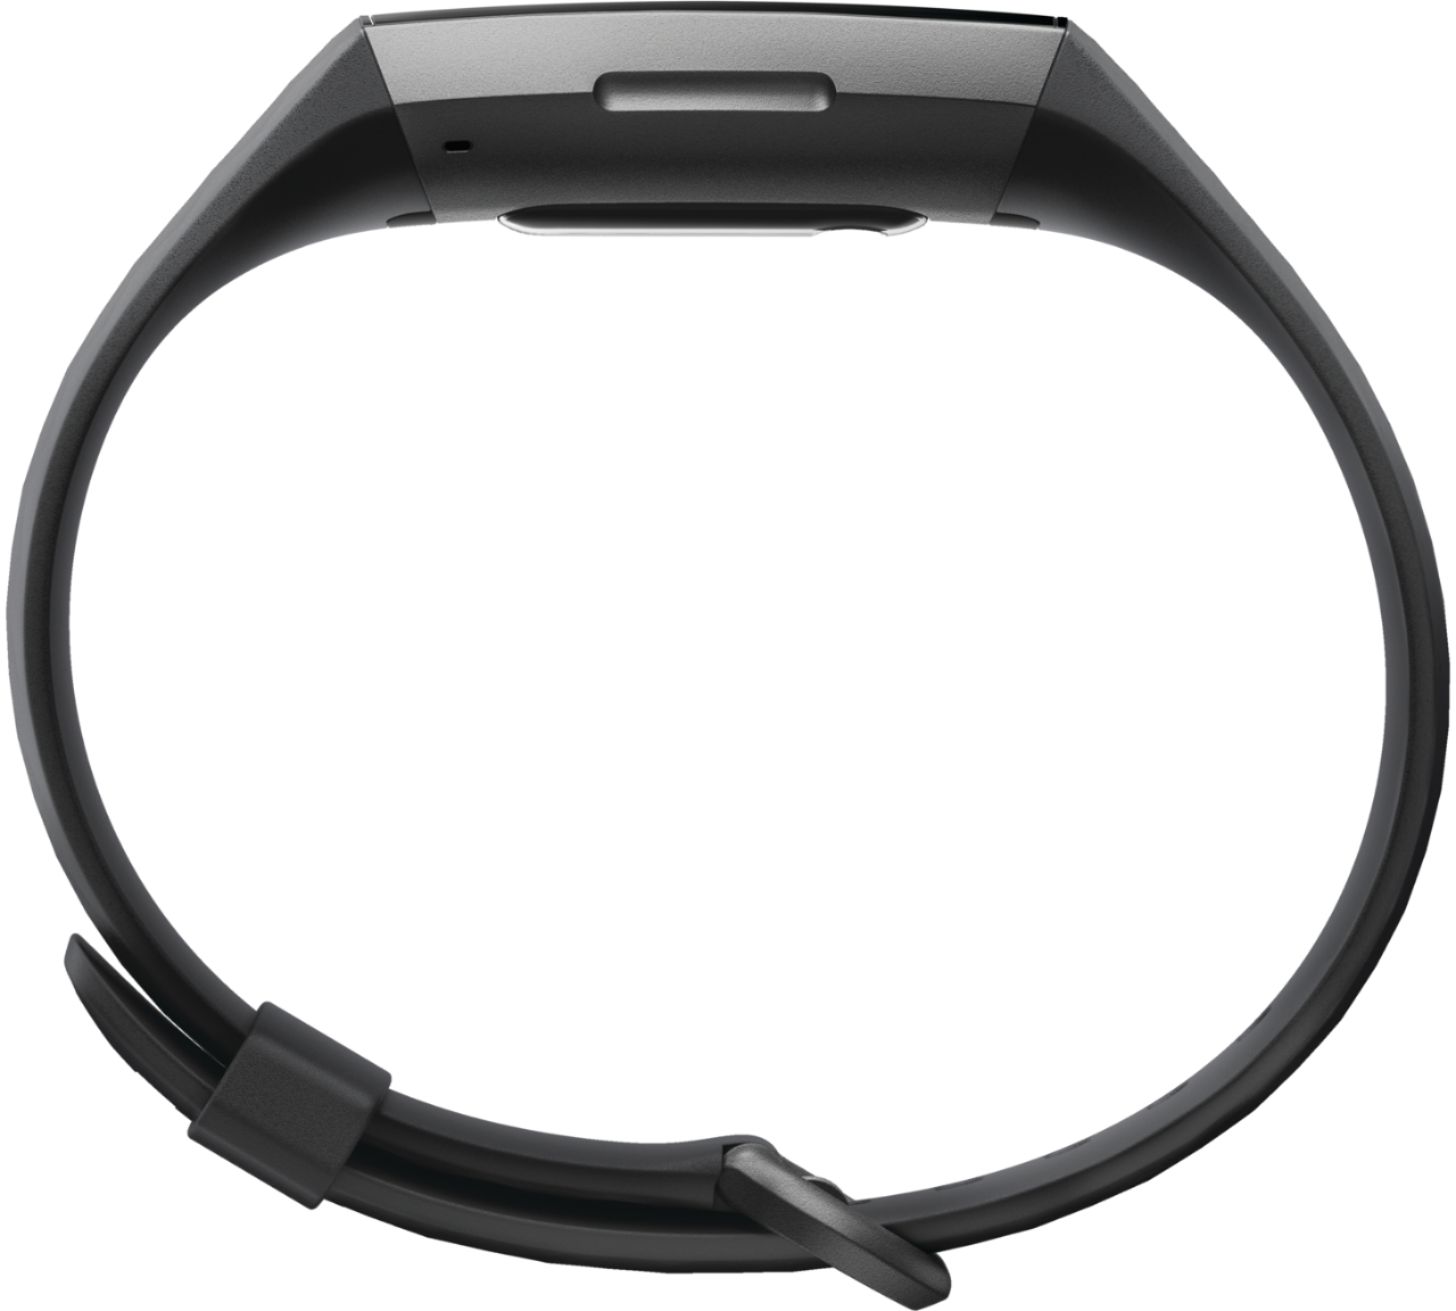 Graphite/Black Fitbit Charge 3 Activity Tracker Heart Rate 